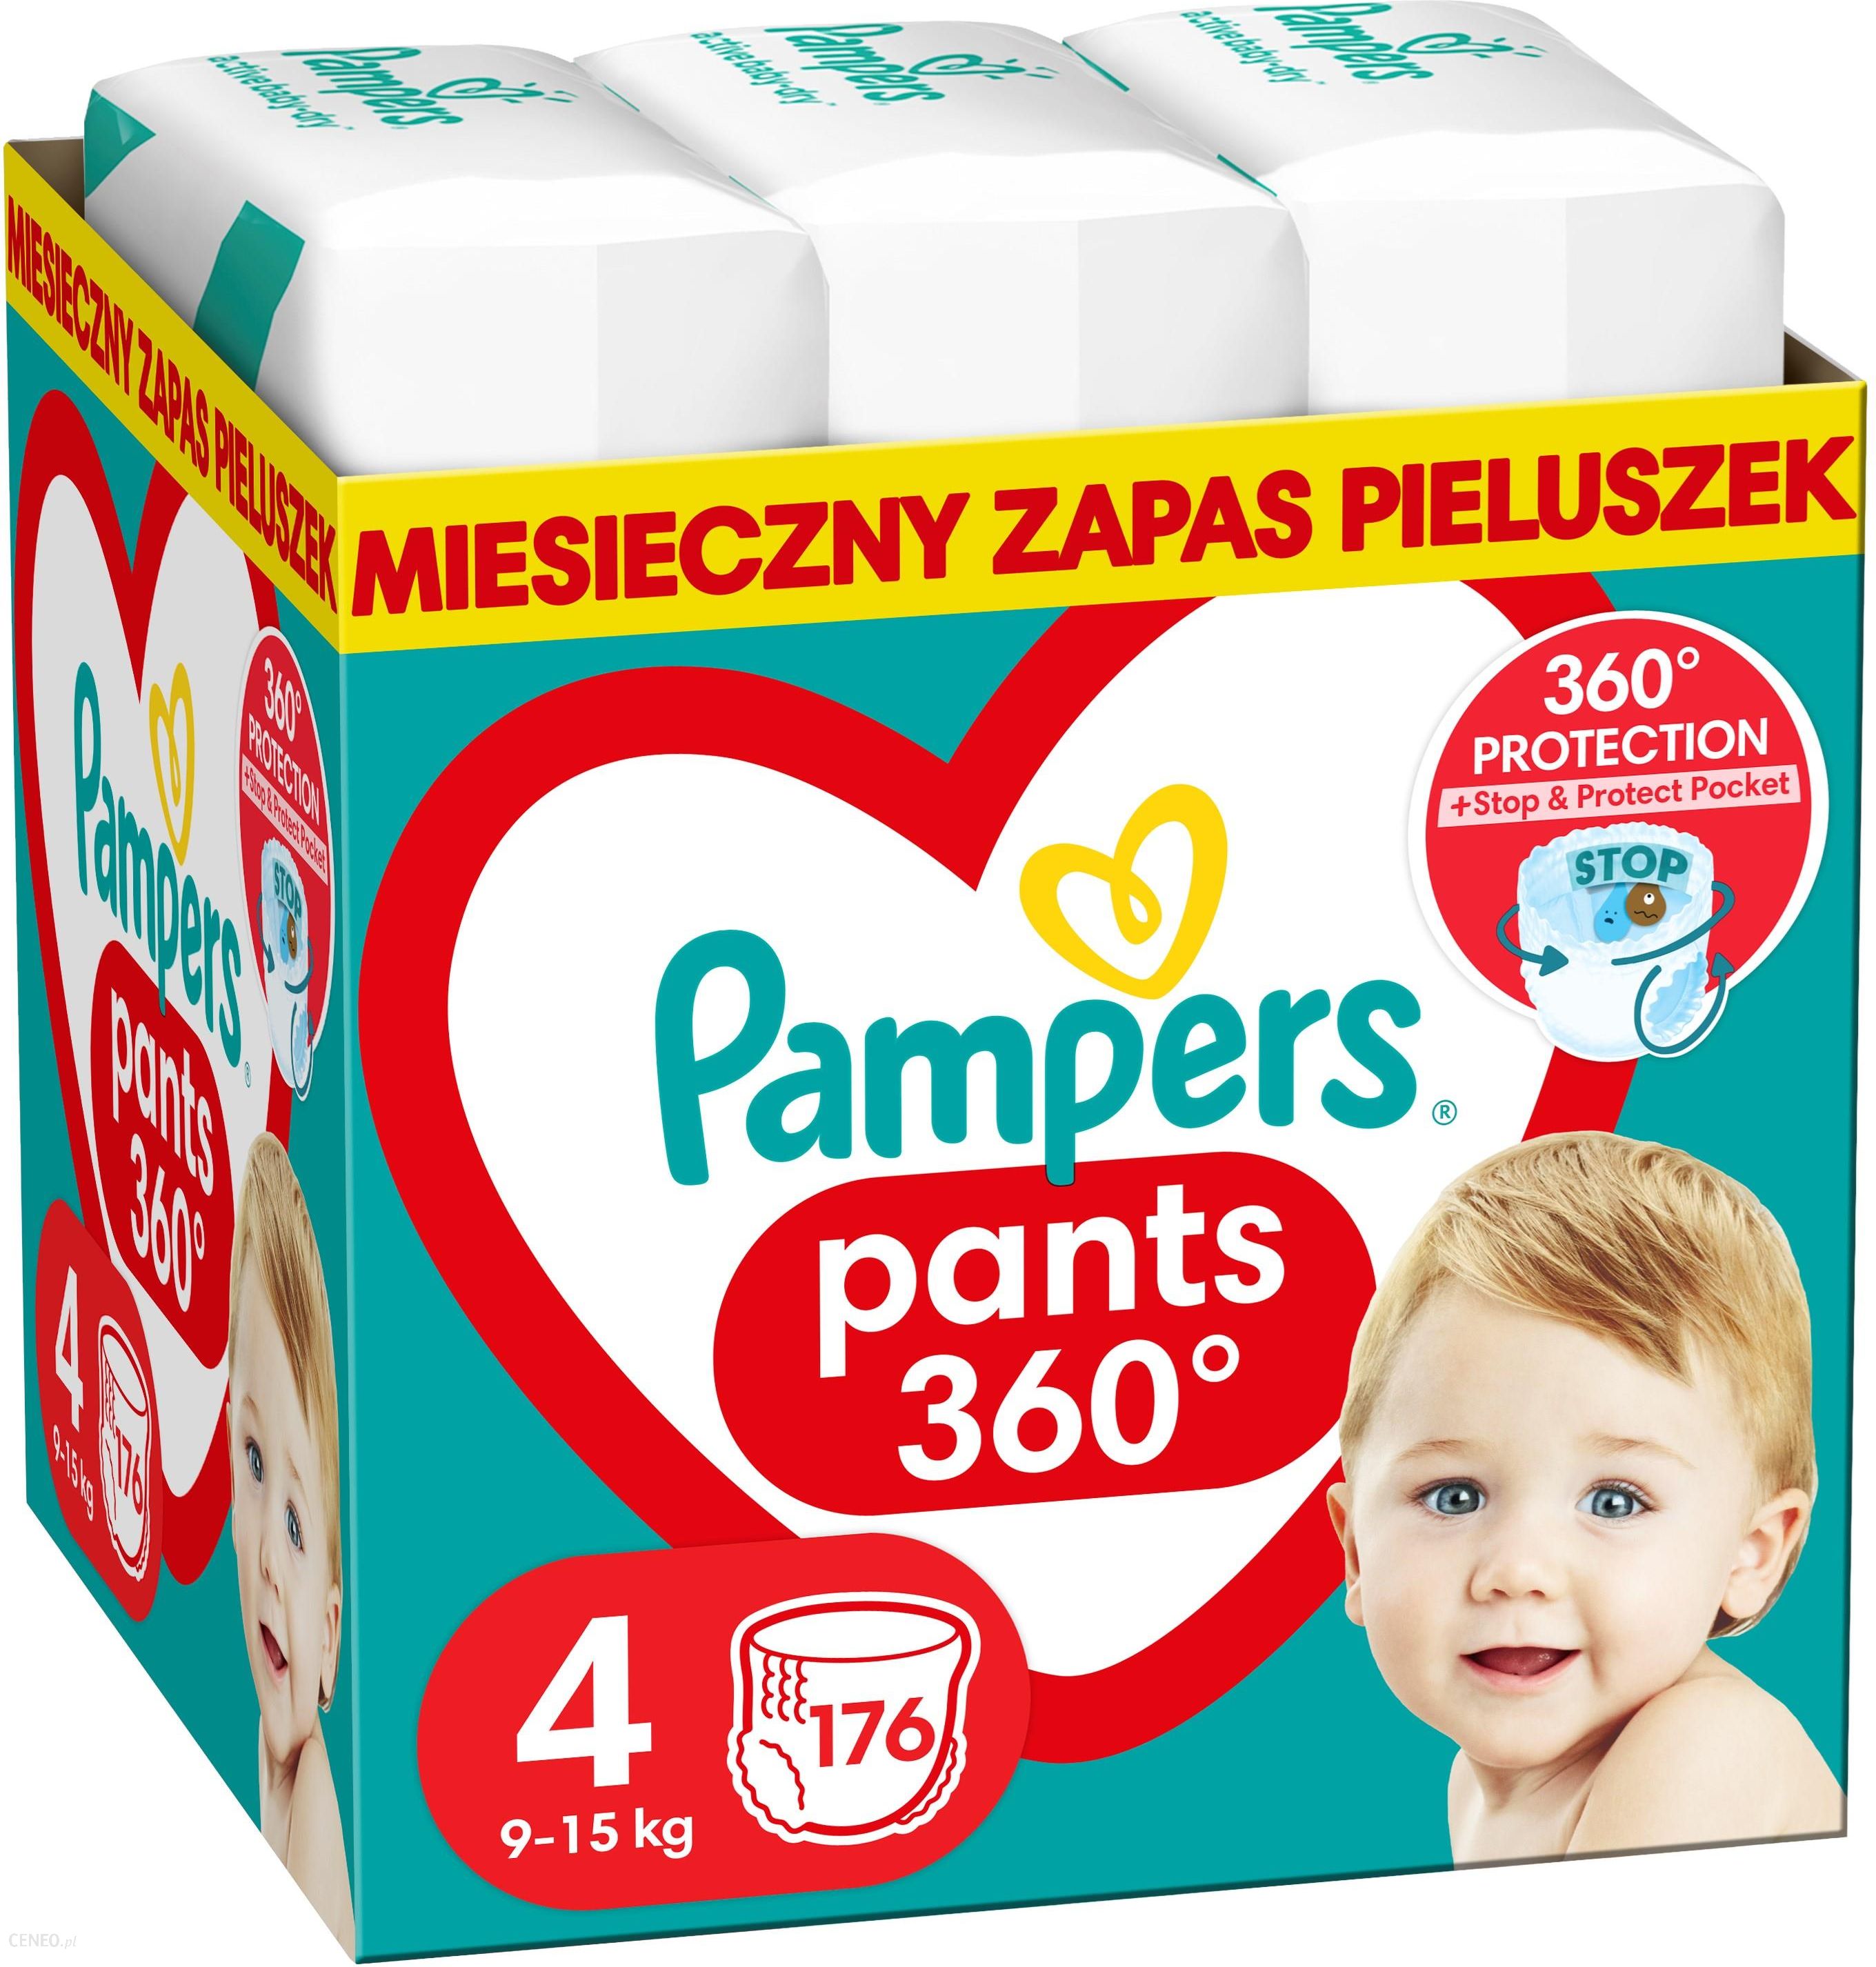 pampers pamers